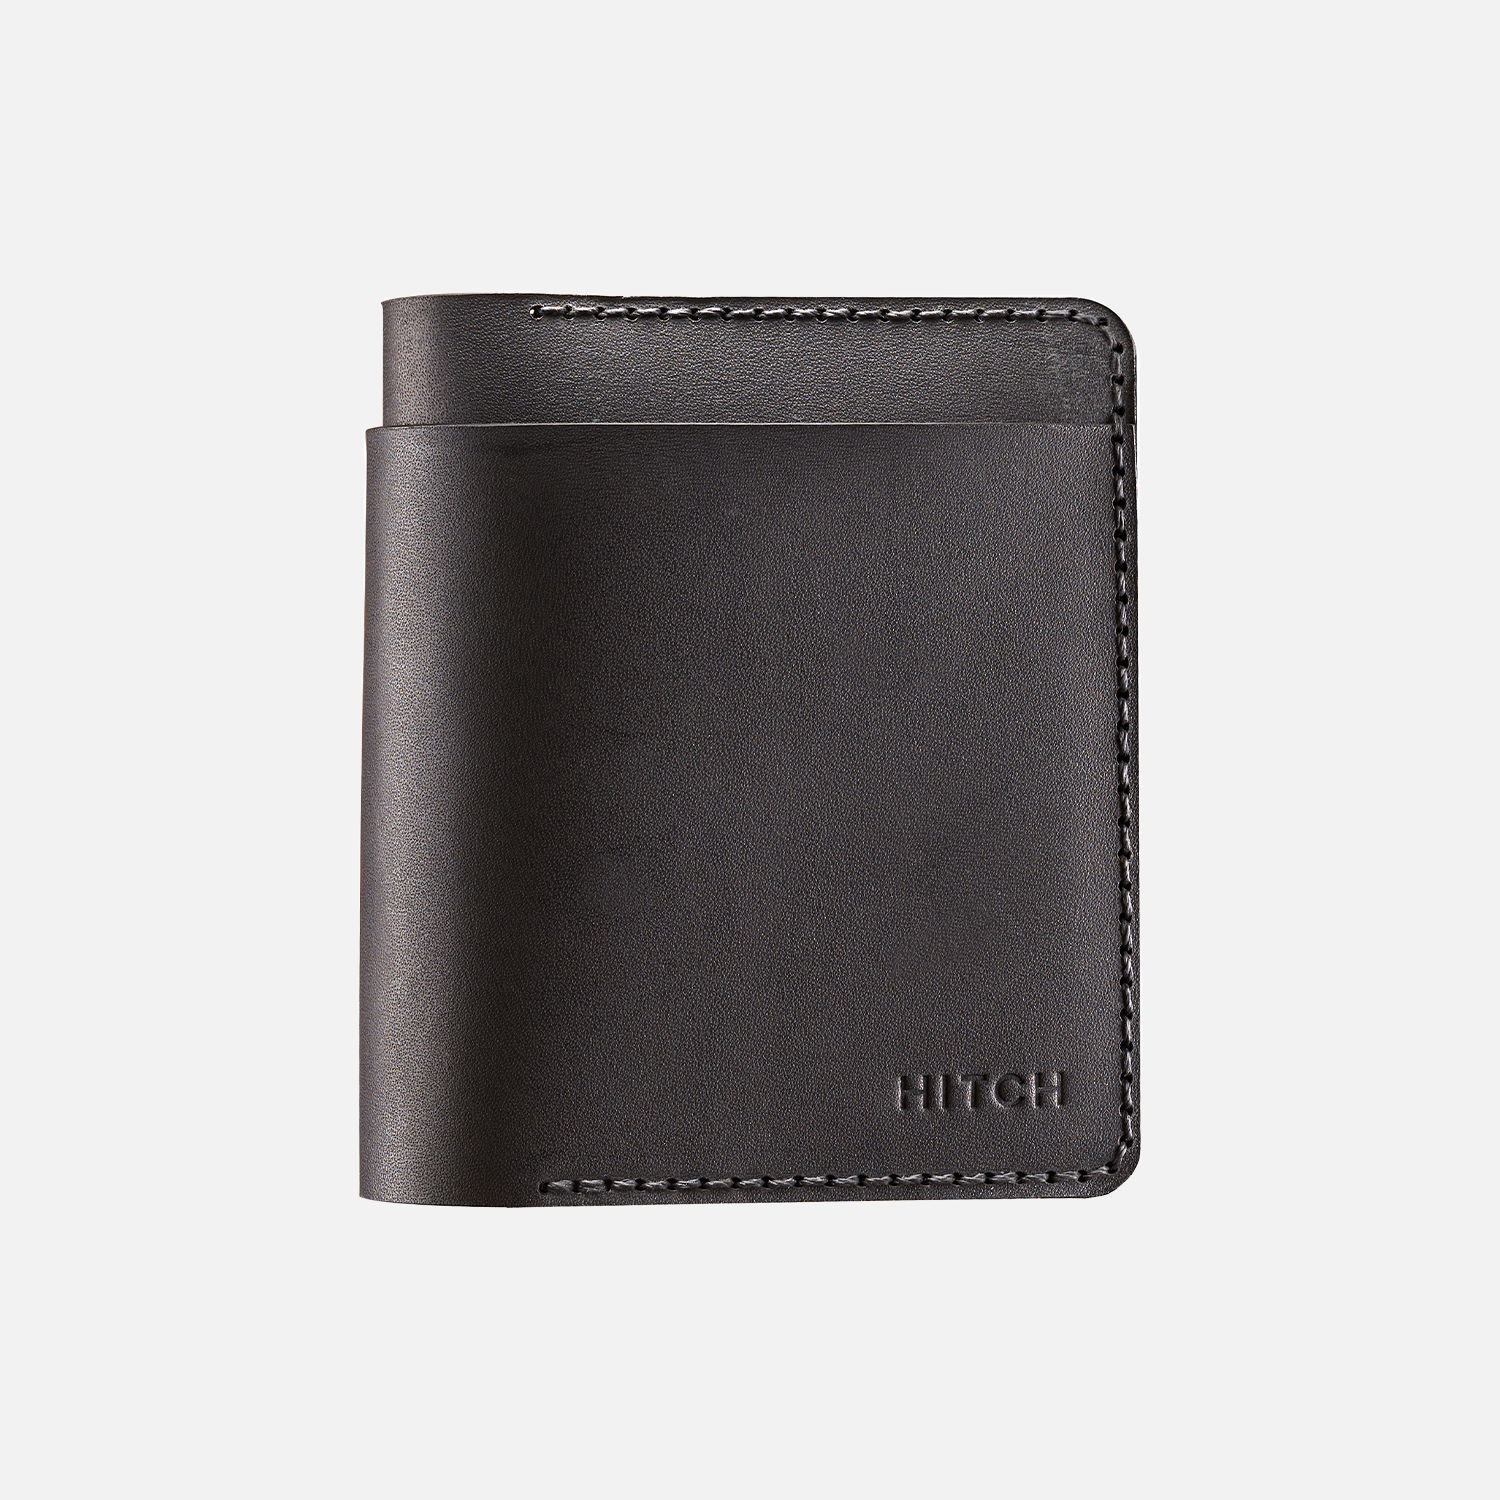 Black leather men's wallet with stitched edges on a white background.